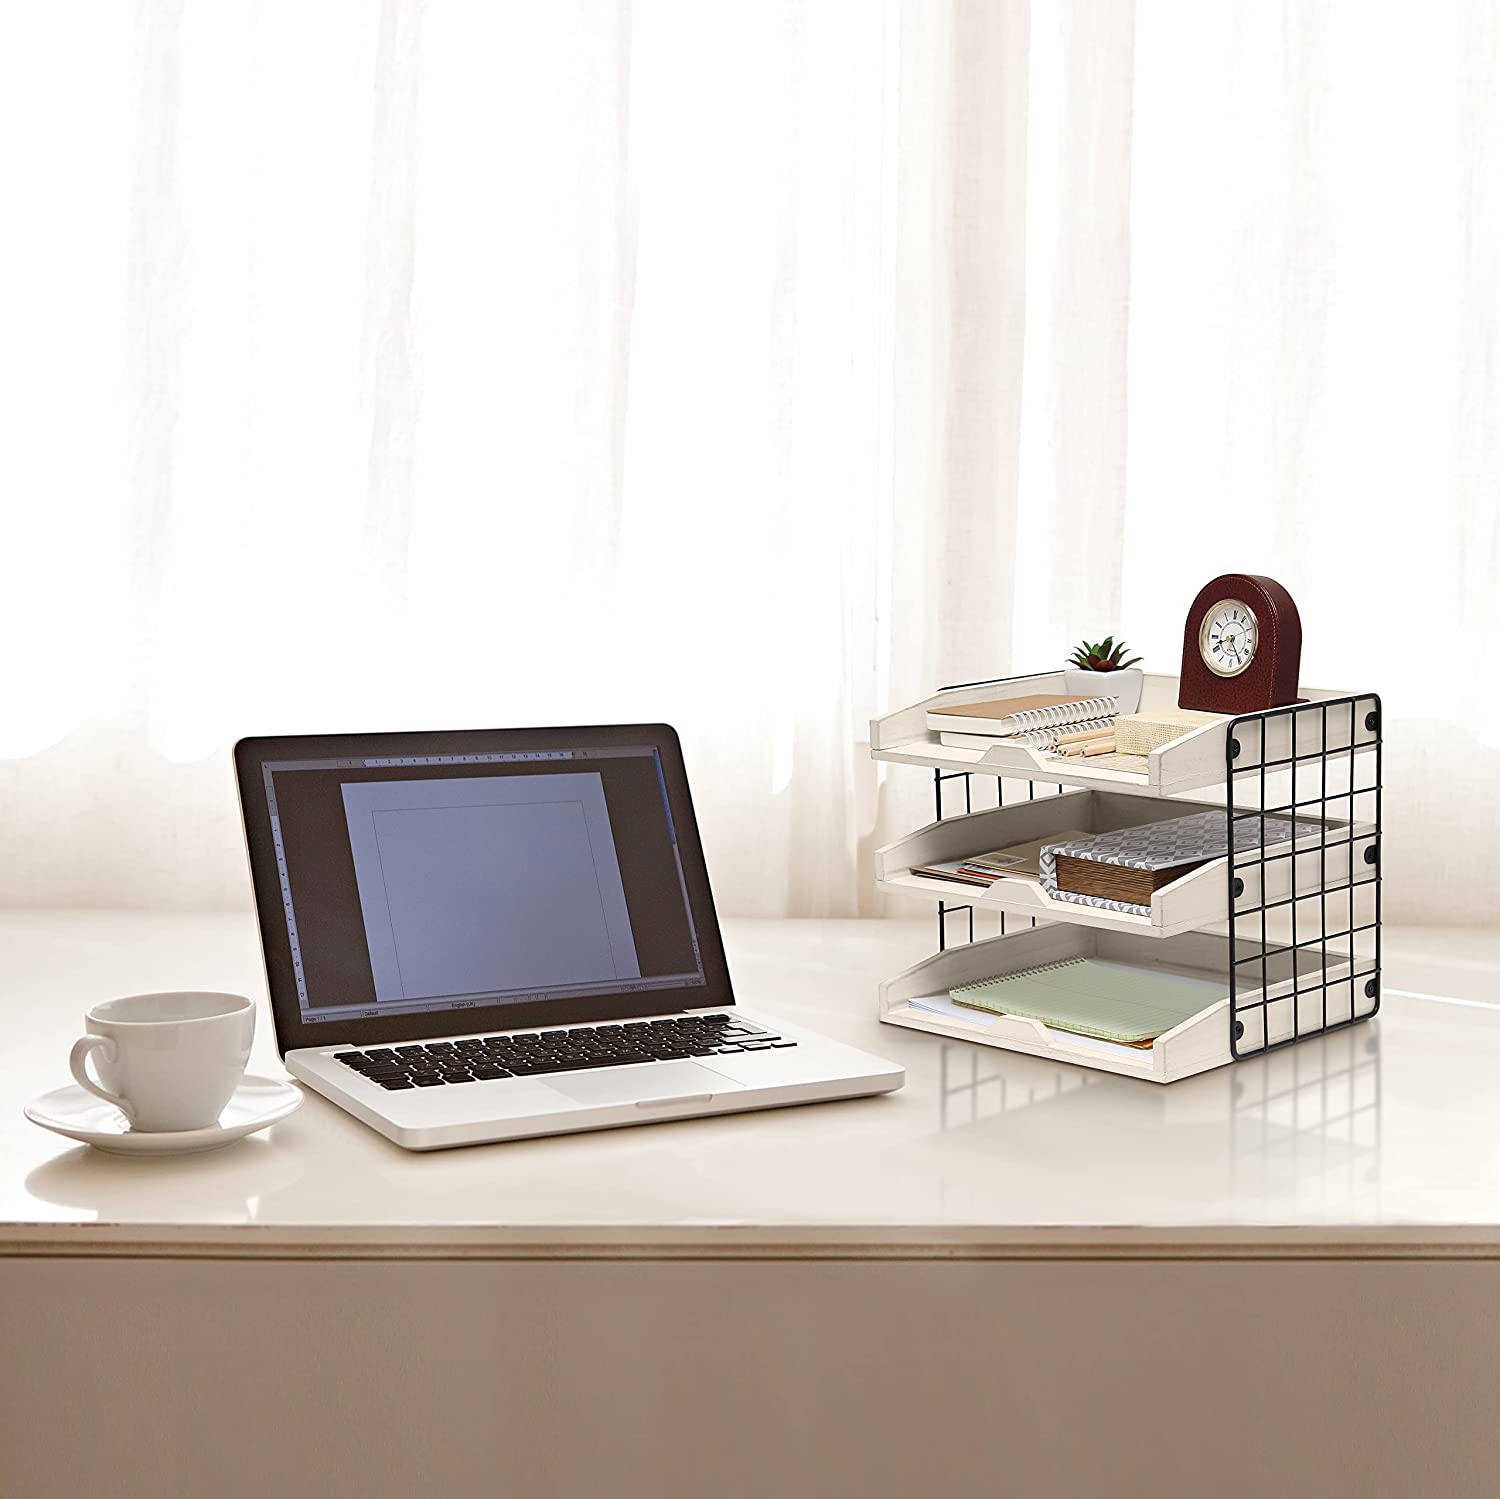 Elegant Designs Home Office Wood Desk Organizer Mail Letter Tray with 3 Shelves File-Boxes, White Wash,12.5x10.5x10.5